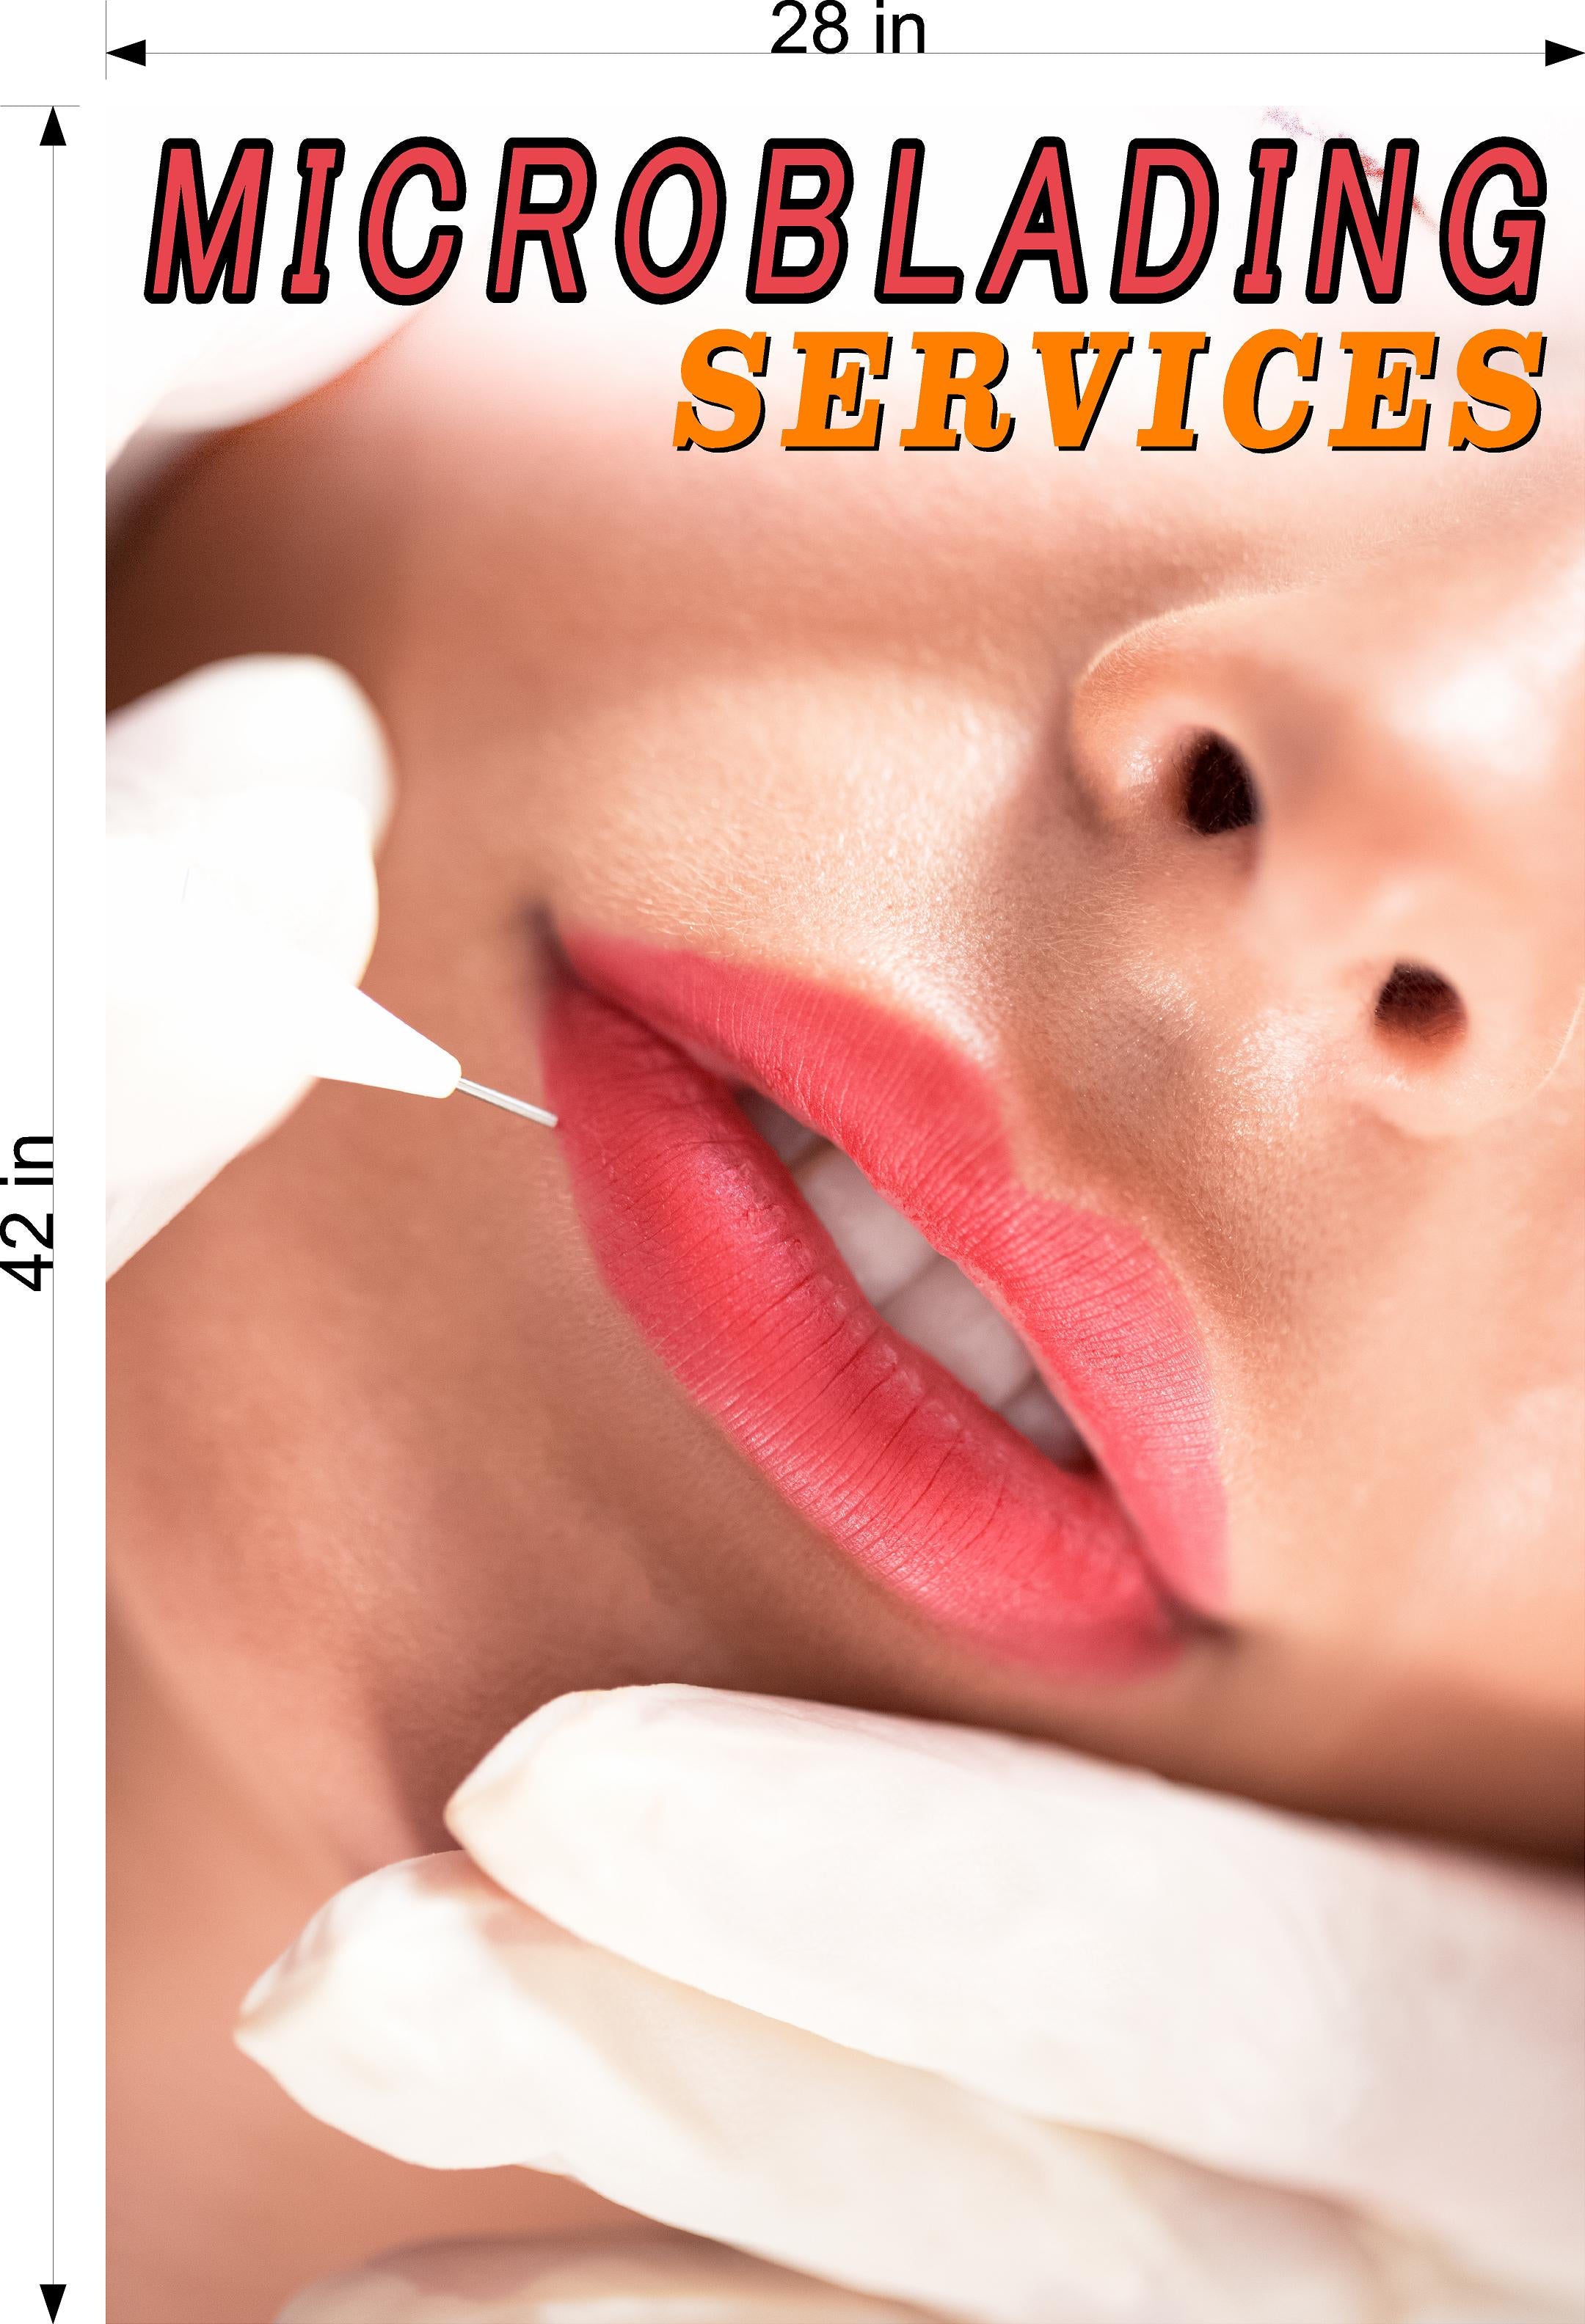 Microblading 04 Wallpaper Poster with Adhesive Backing Interior Services Vertical